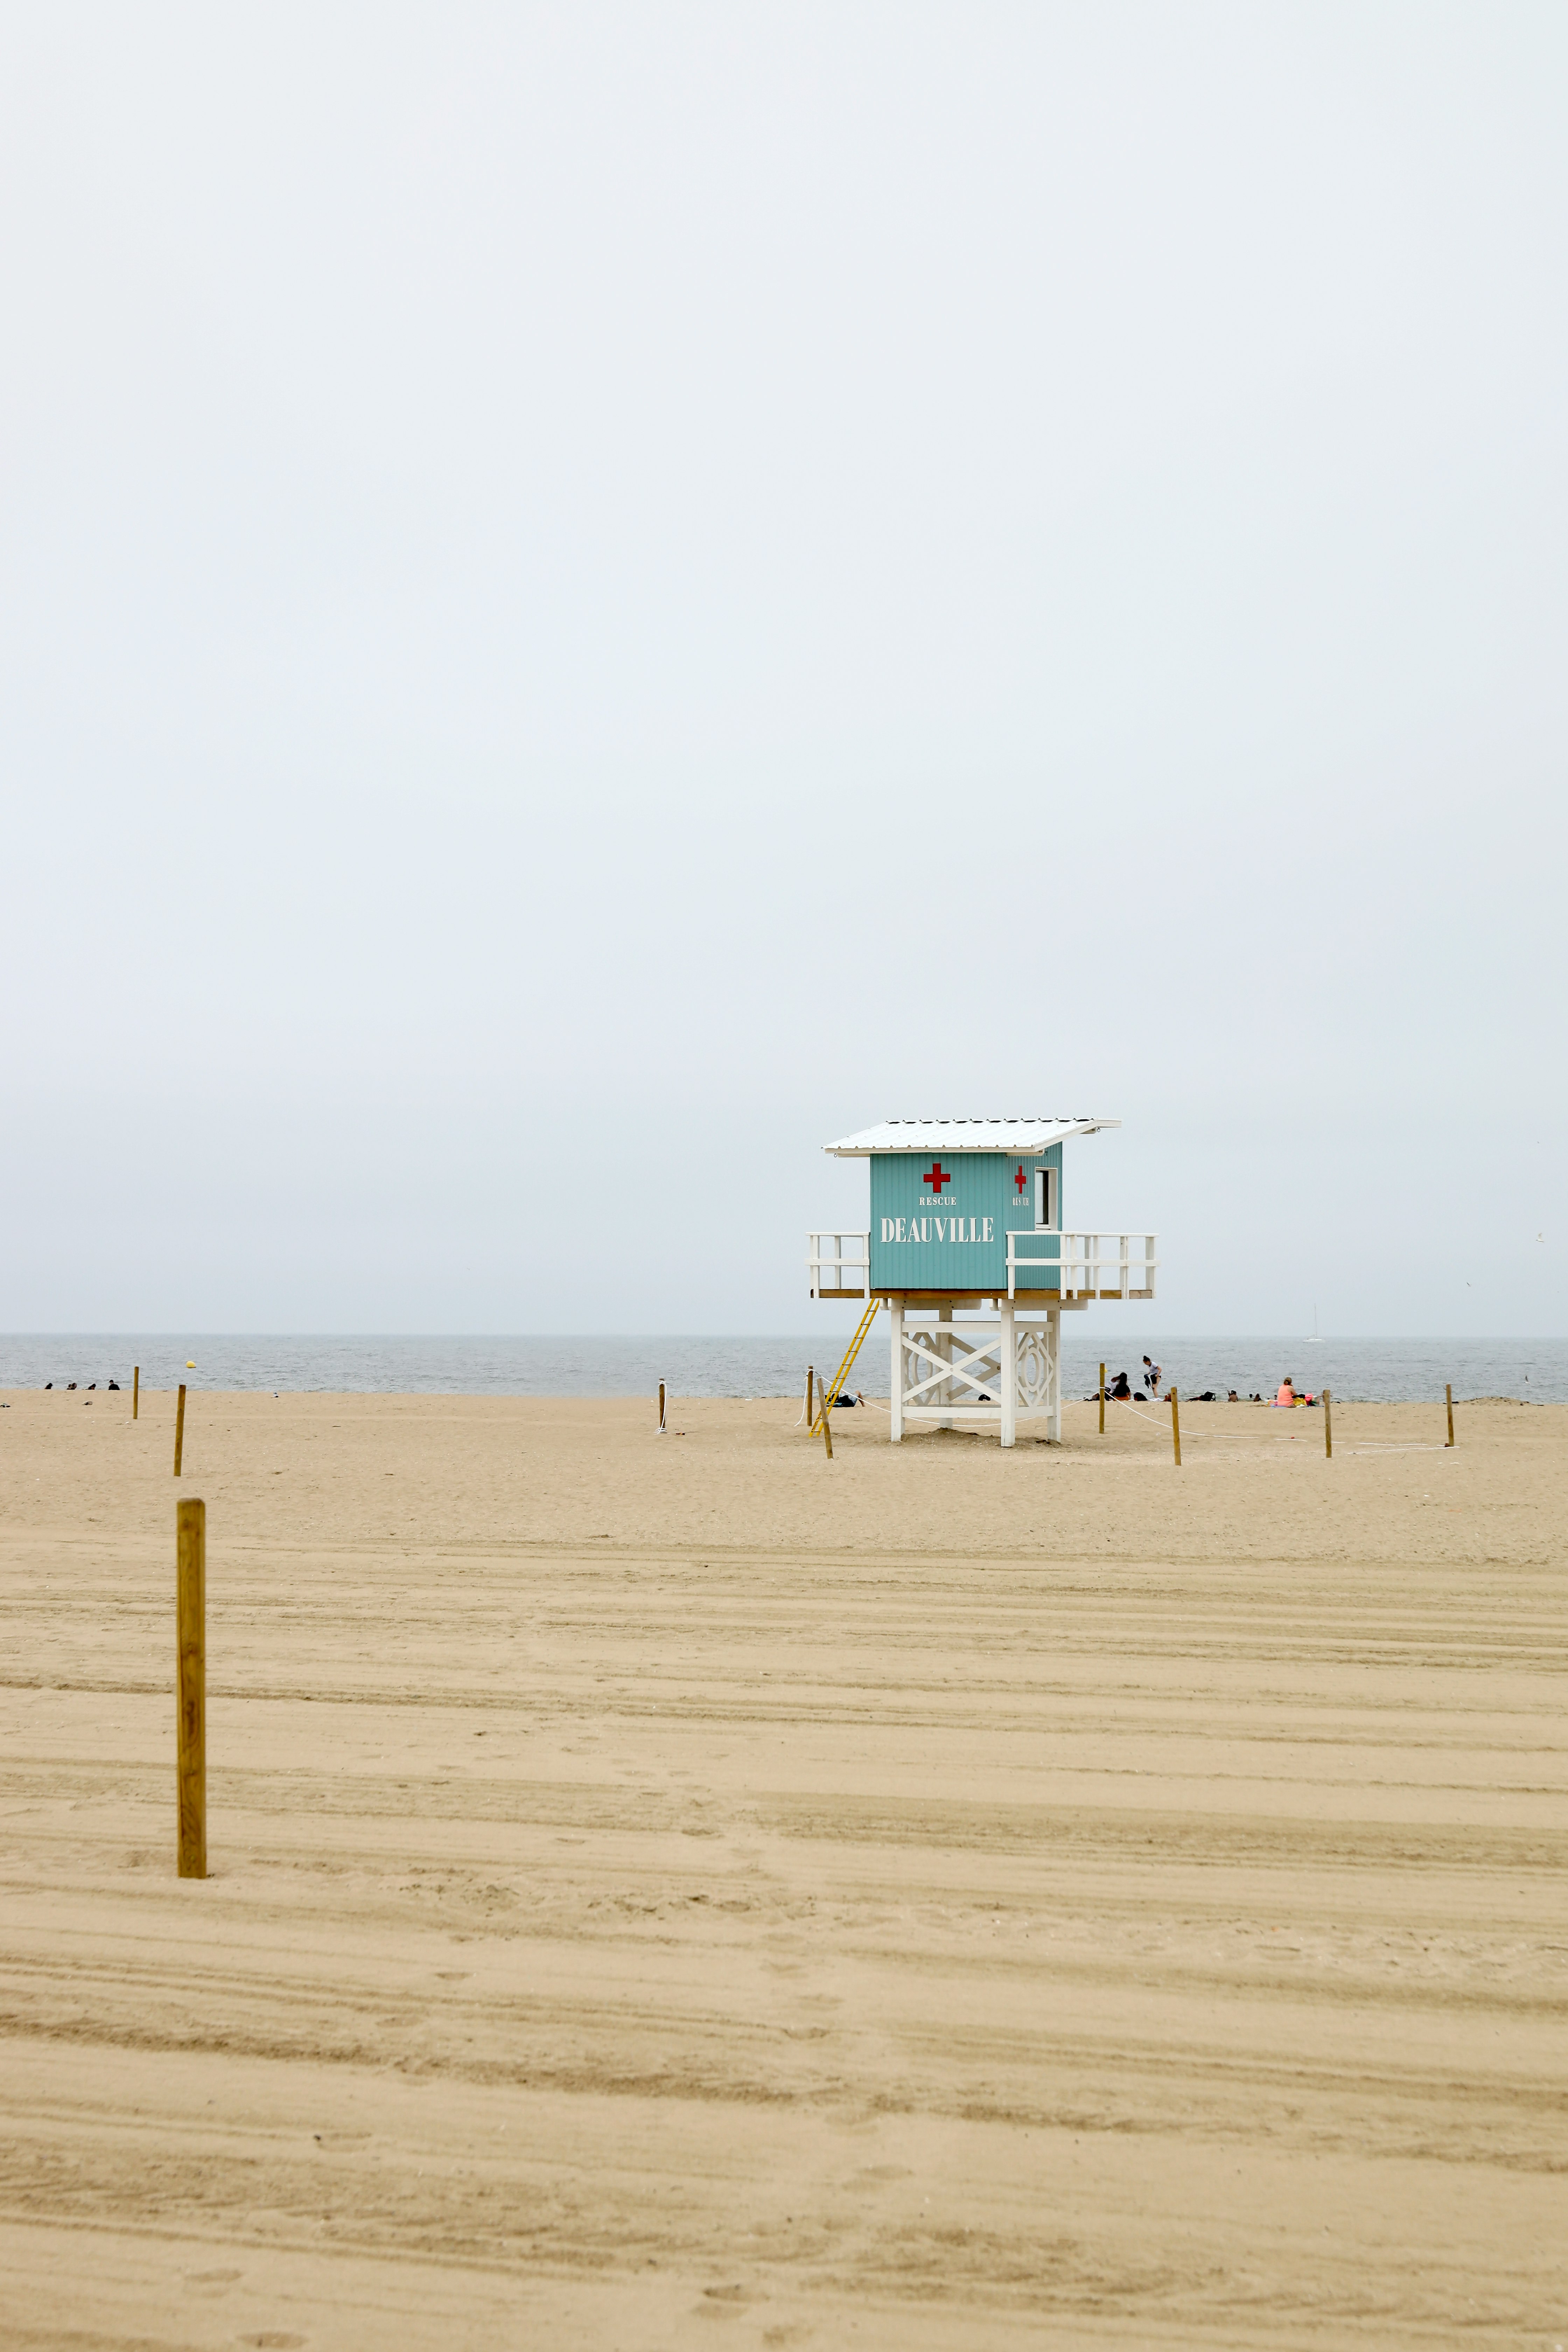 blue and white lifeguard tower on beach